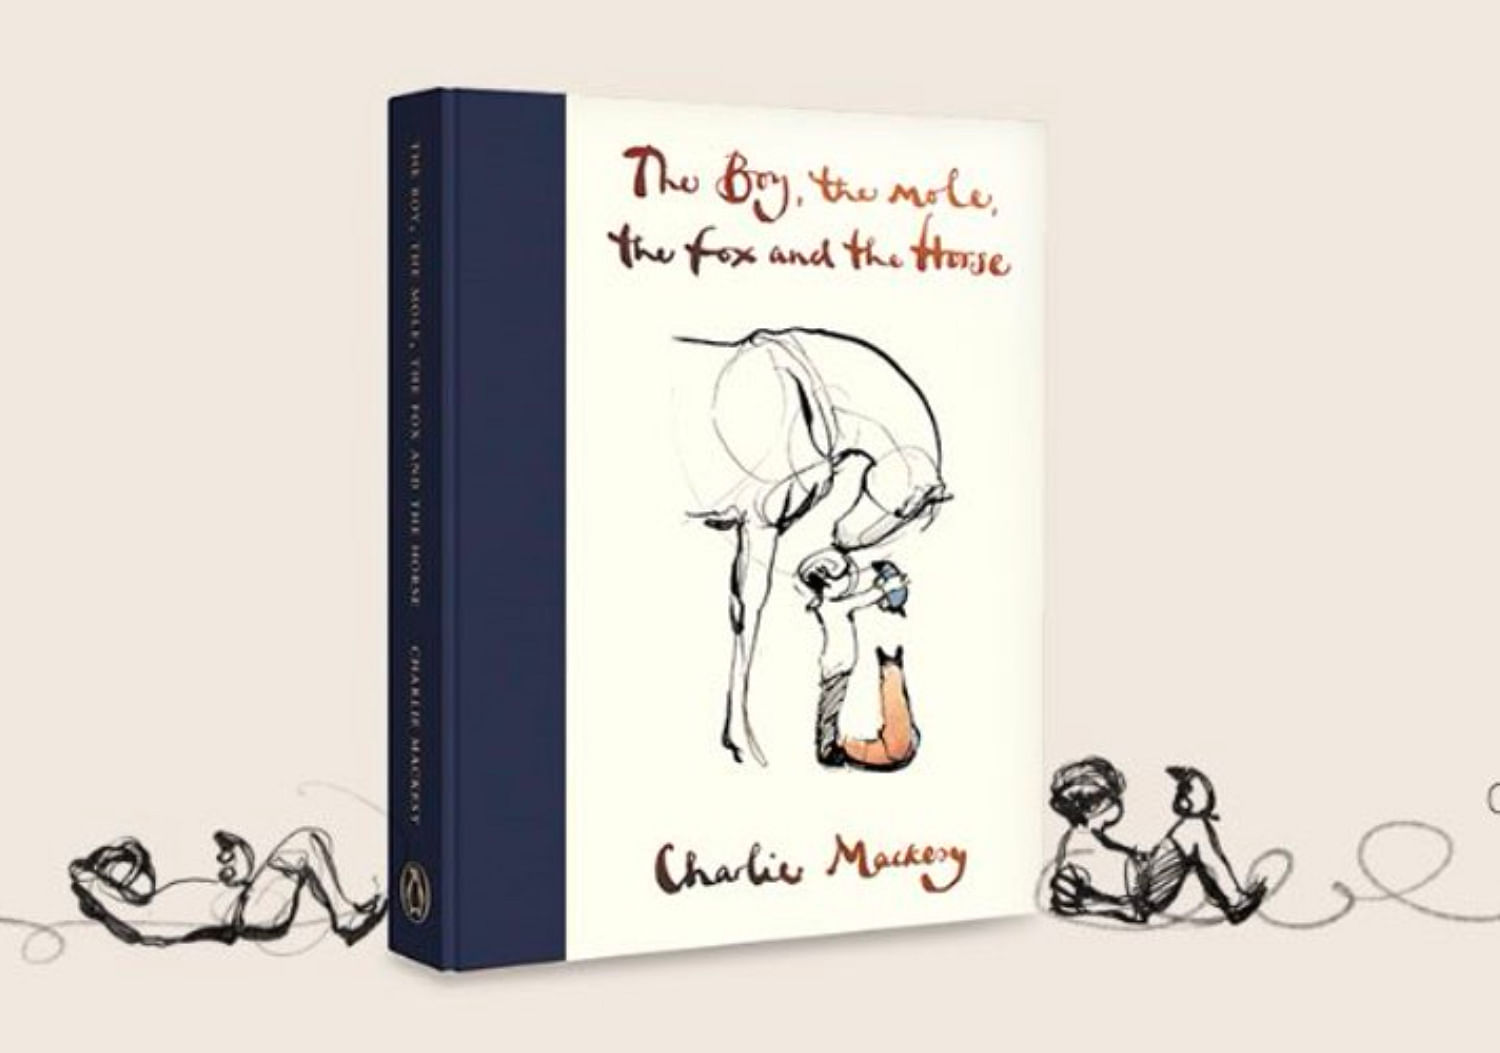 Charlie Mackesy, who began as a cartoonist and book illustrator before being taken on by galleries, through his book "The Boy, The Mole, The Fox and The Horse" tells about his four unlikely friends. (Twitter Image/@charliemackesy)